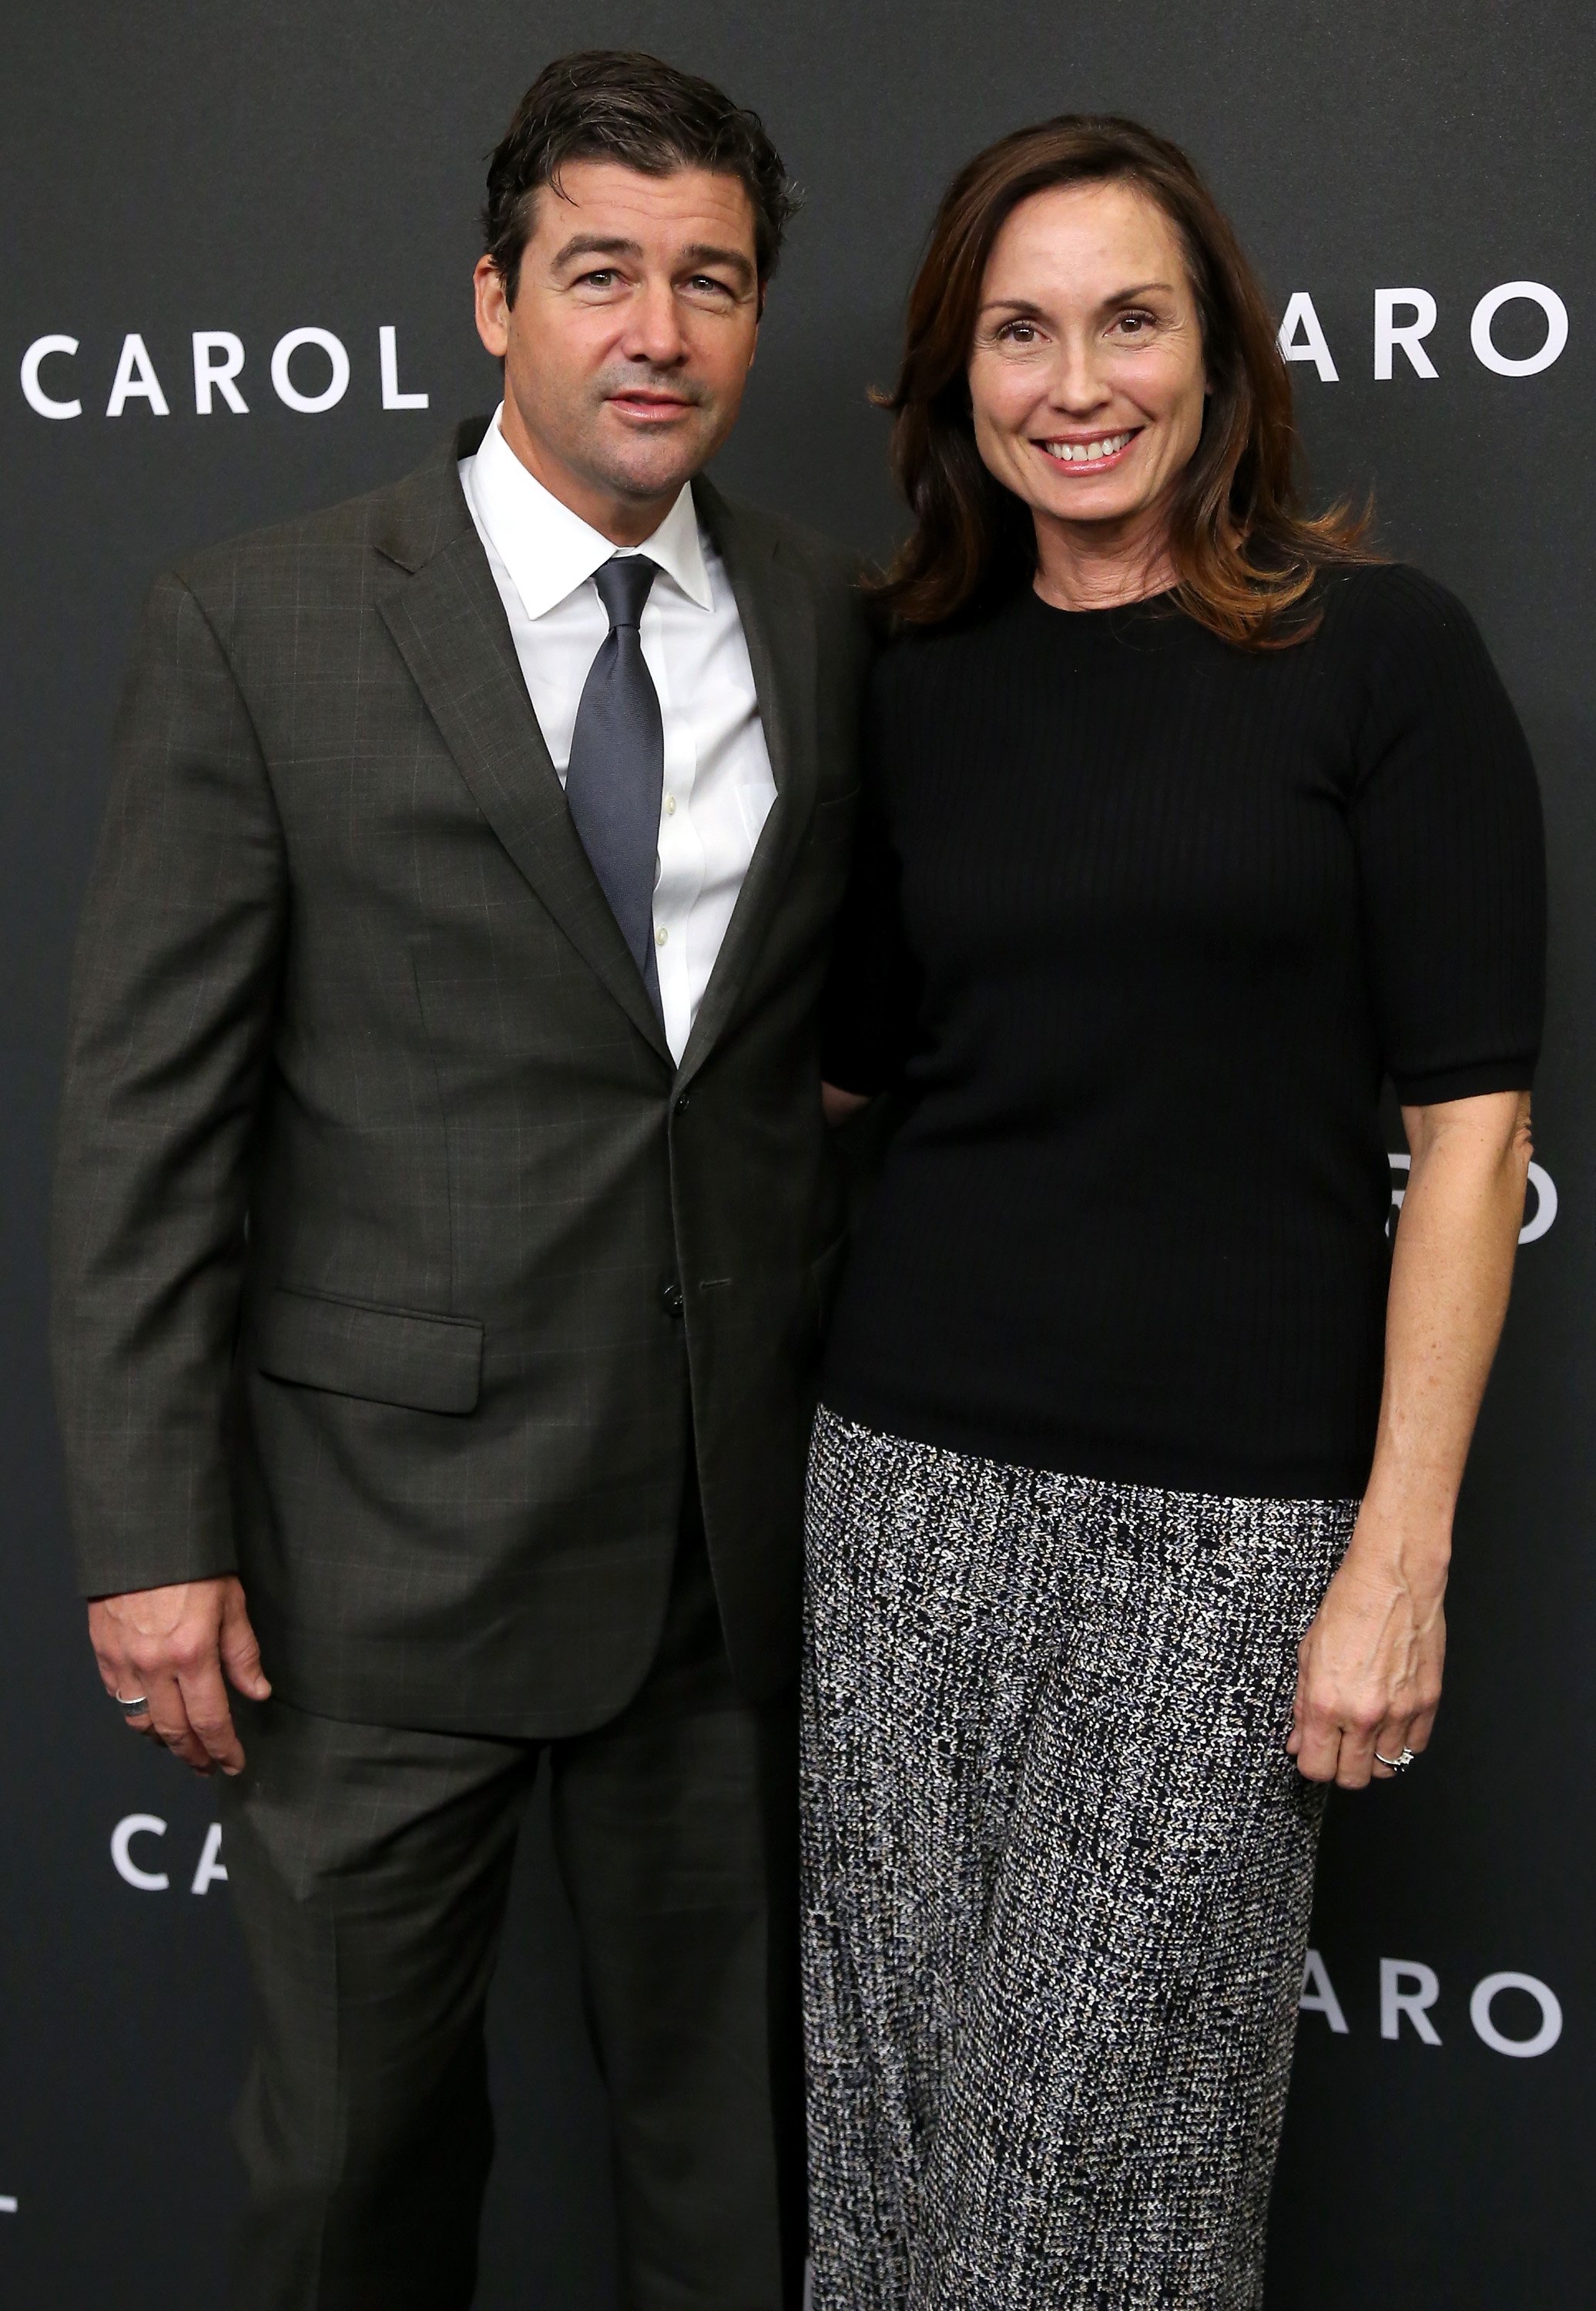 Kyle Chandler and Kathryn Chandler at the New York premiere of "Carol" on November 16, 2015, in New York City. | Source: Getty Images